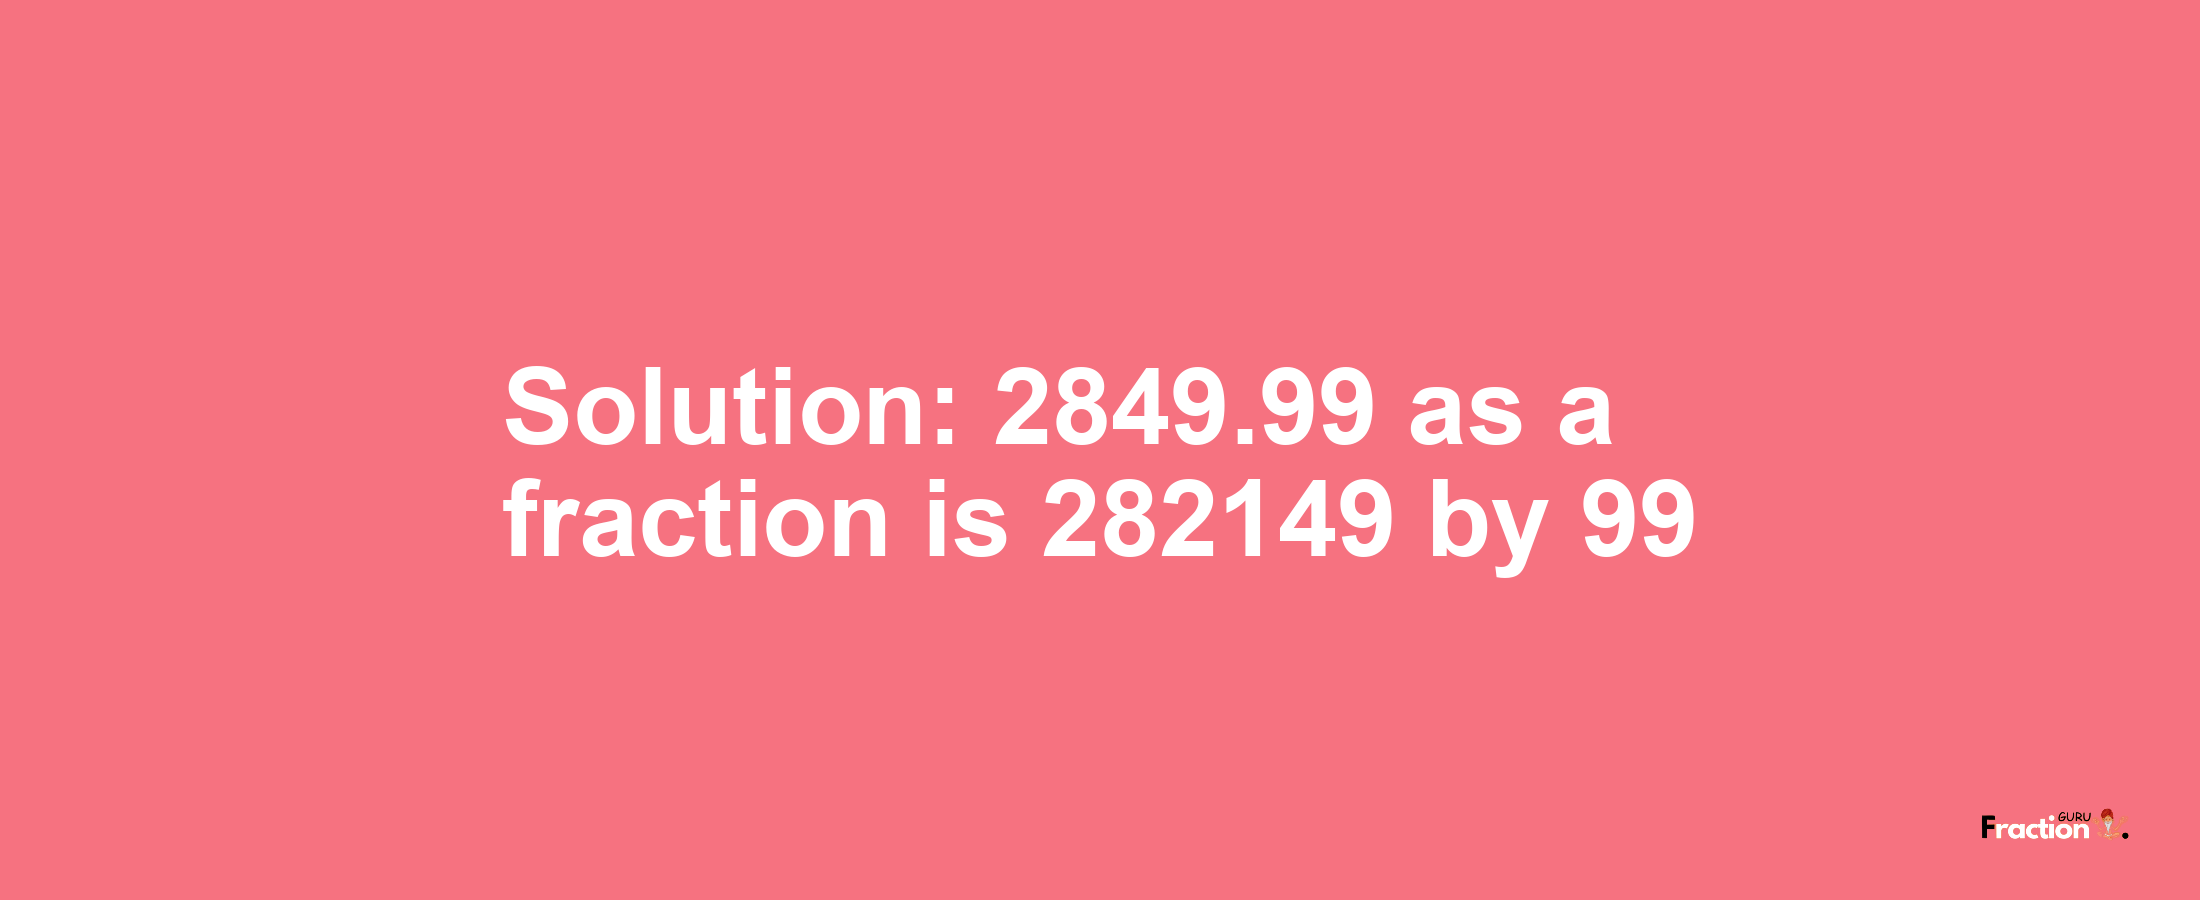 Solution:2849.99 as a fraction is 282149/99